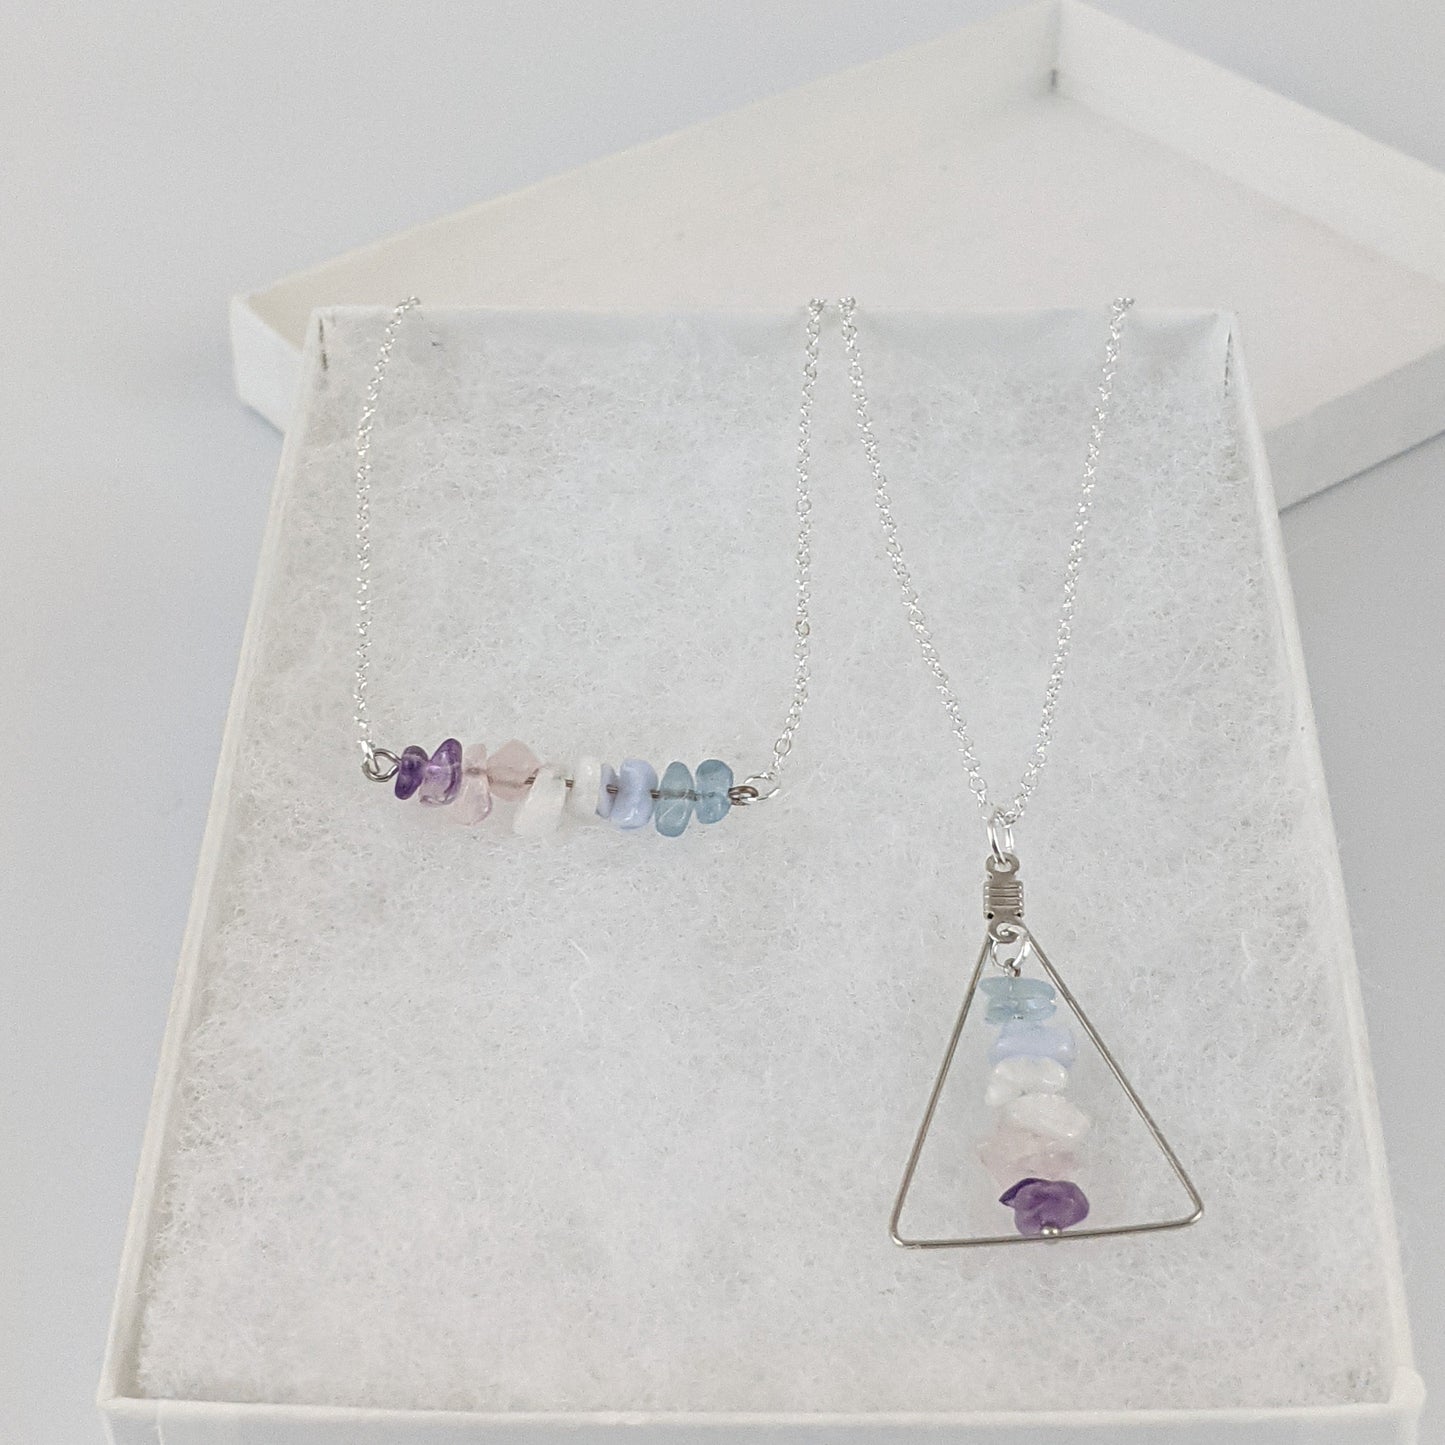 Good Vibes: Stress Relief and Calm Bar and Triangle Pendant Necklace Set